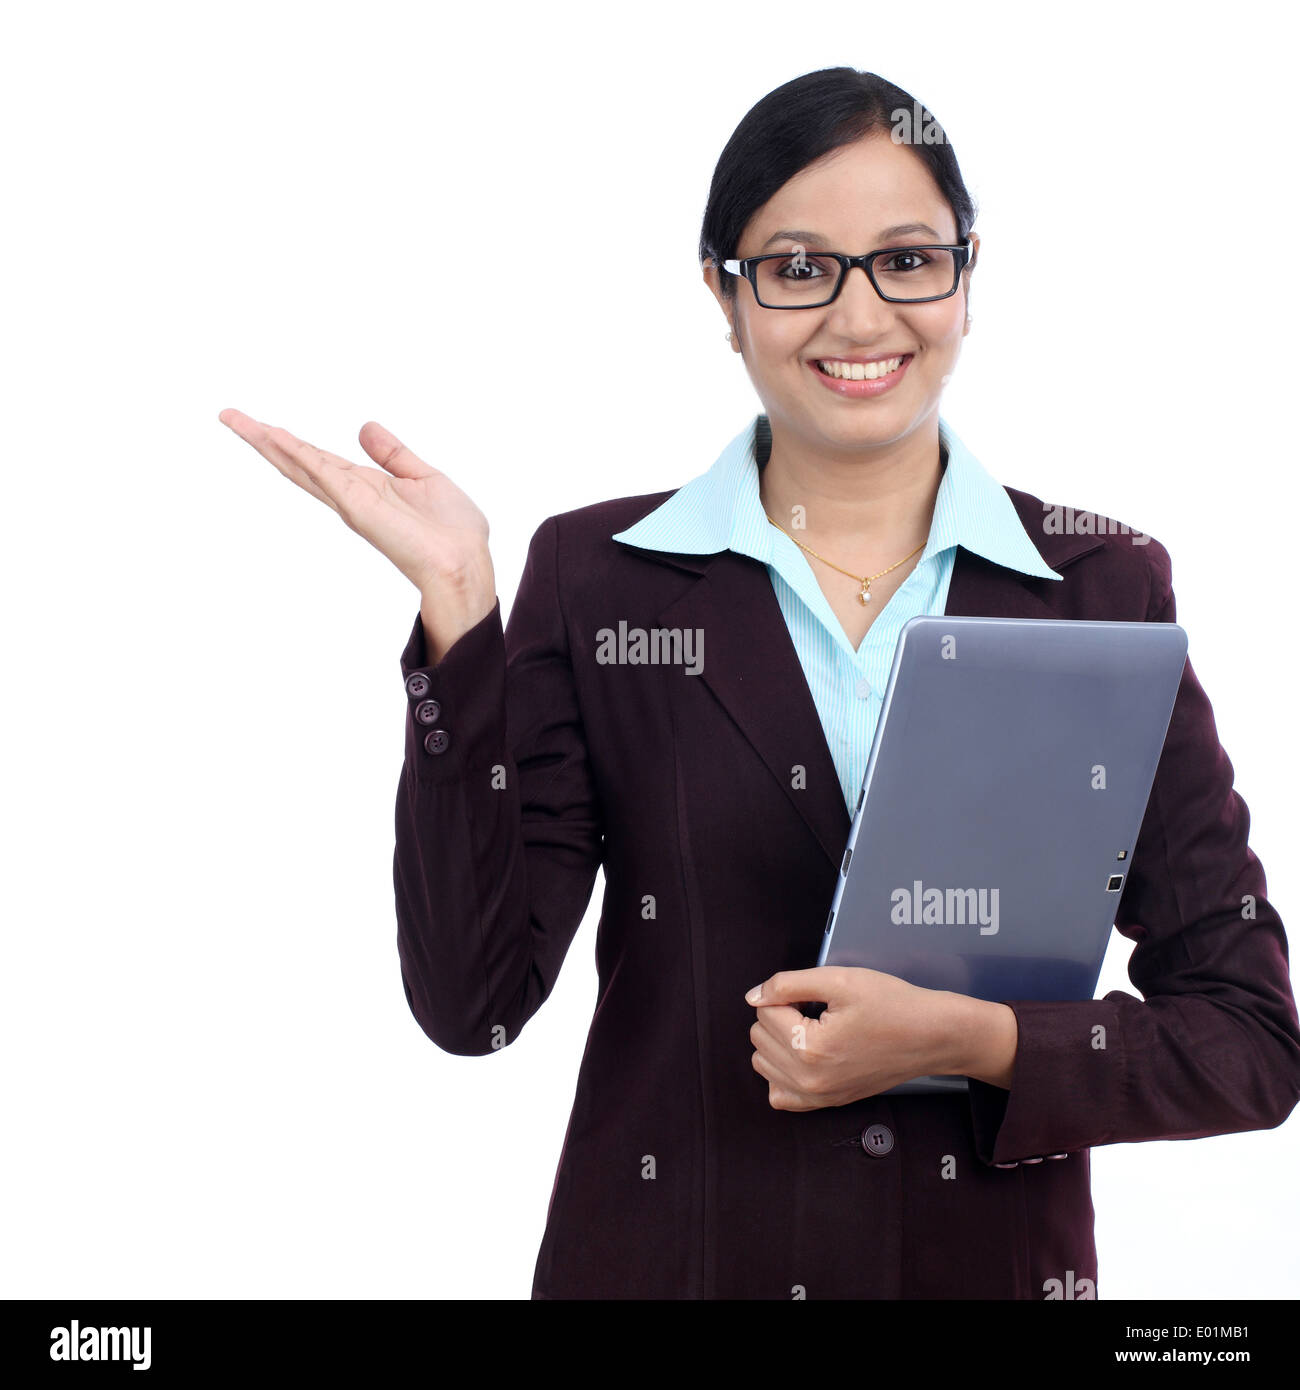 Young business woman holding a tablet computer Banque D'Images